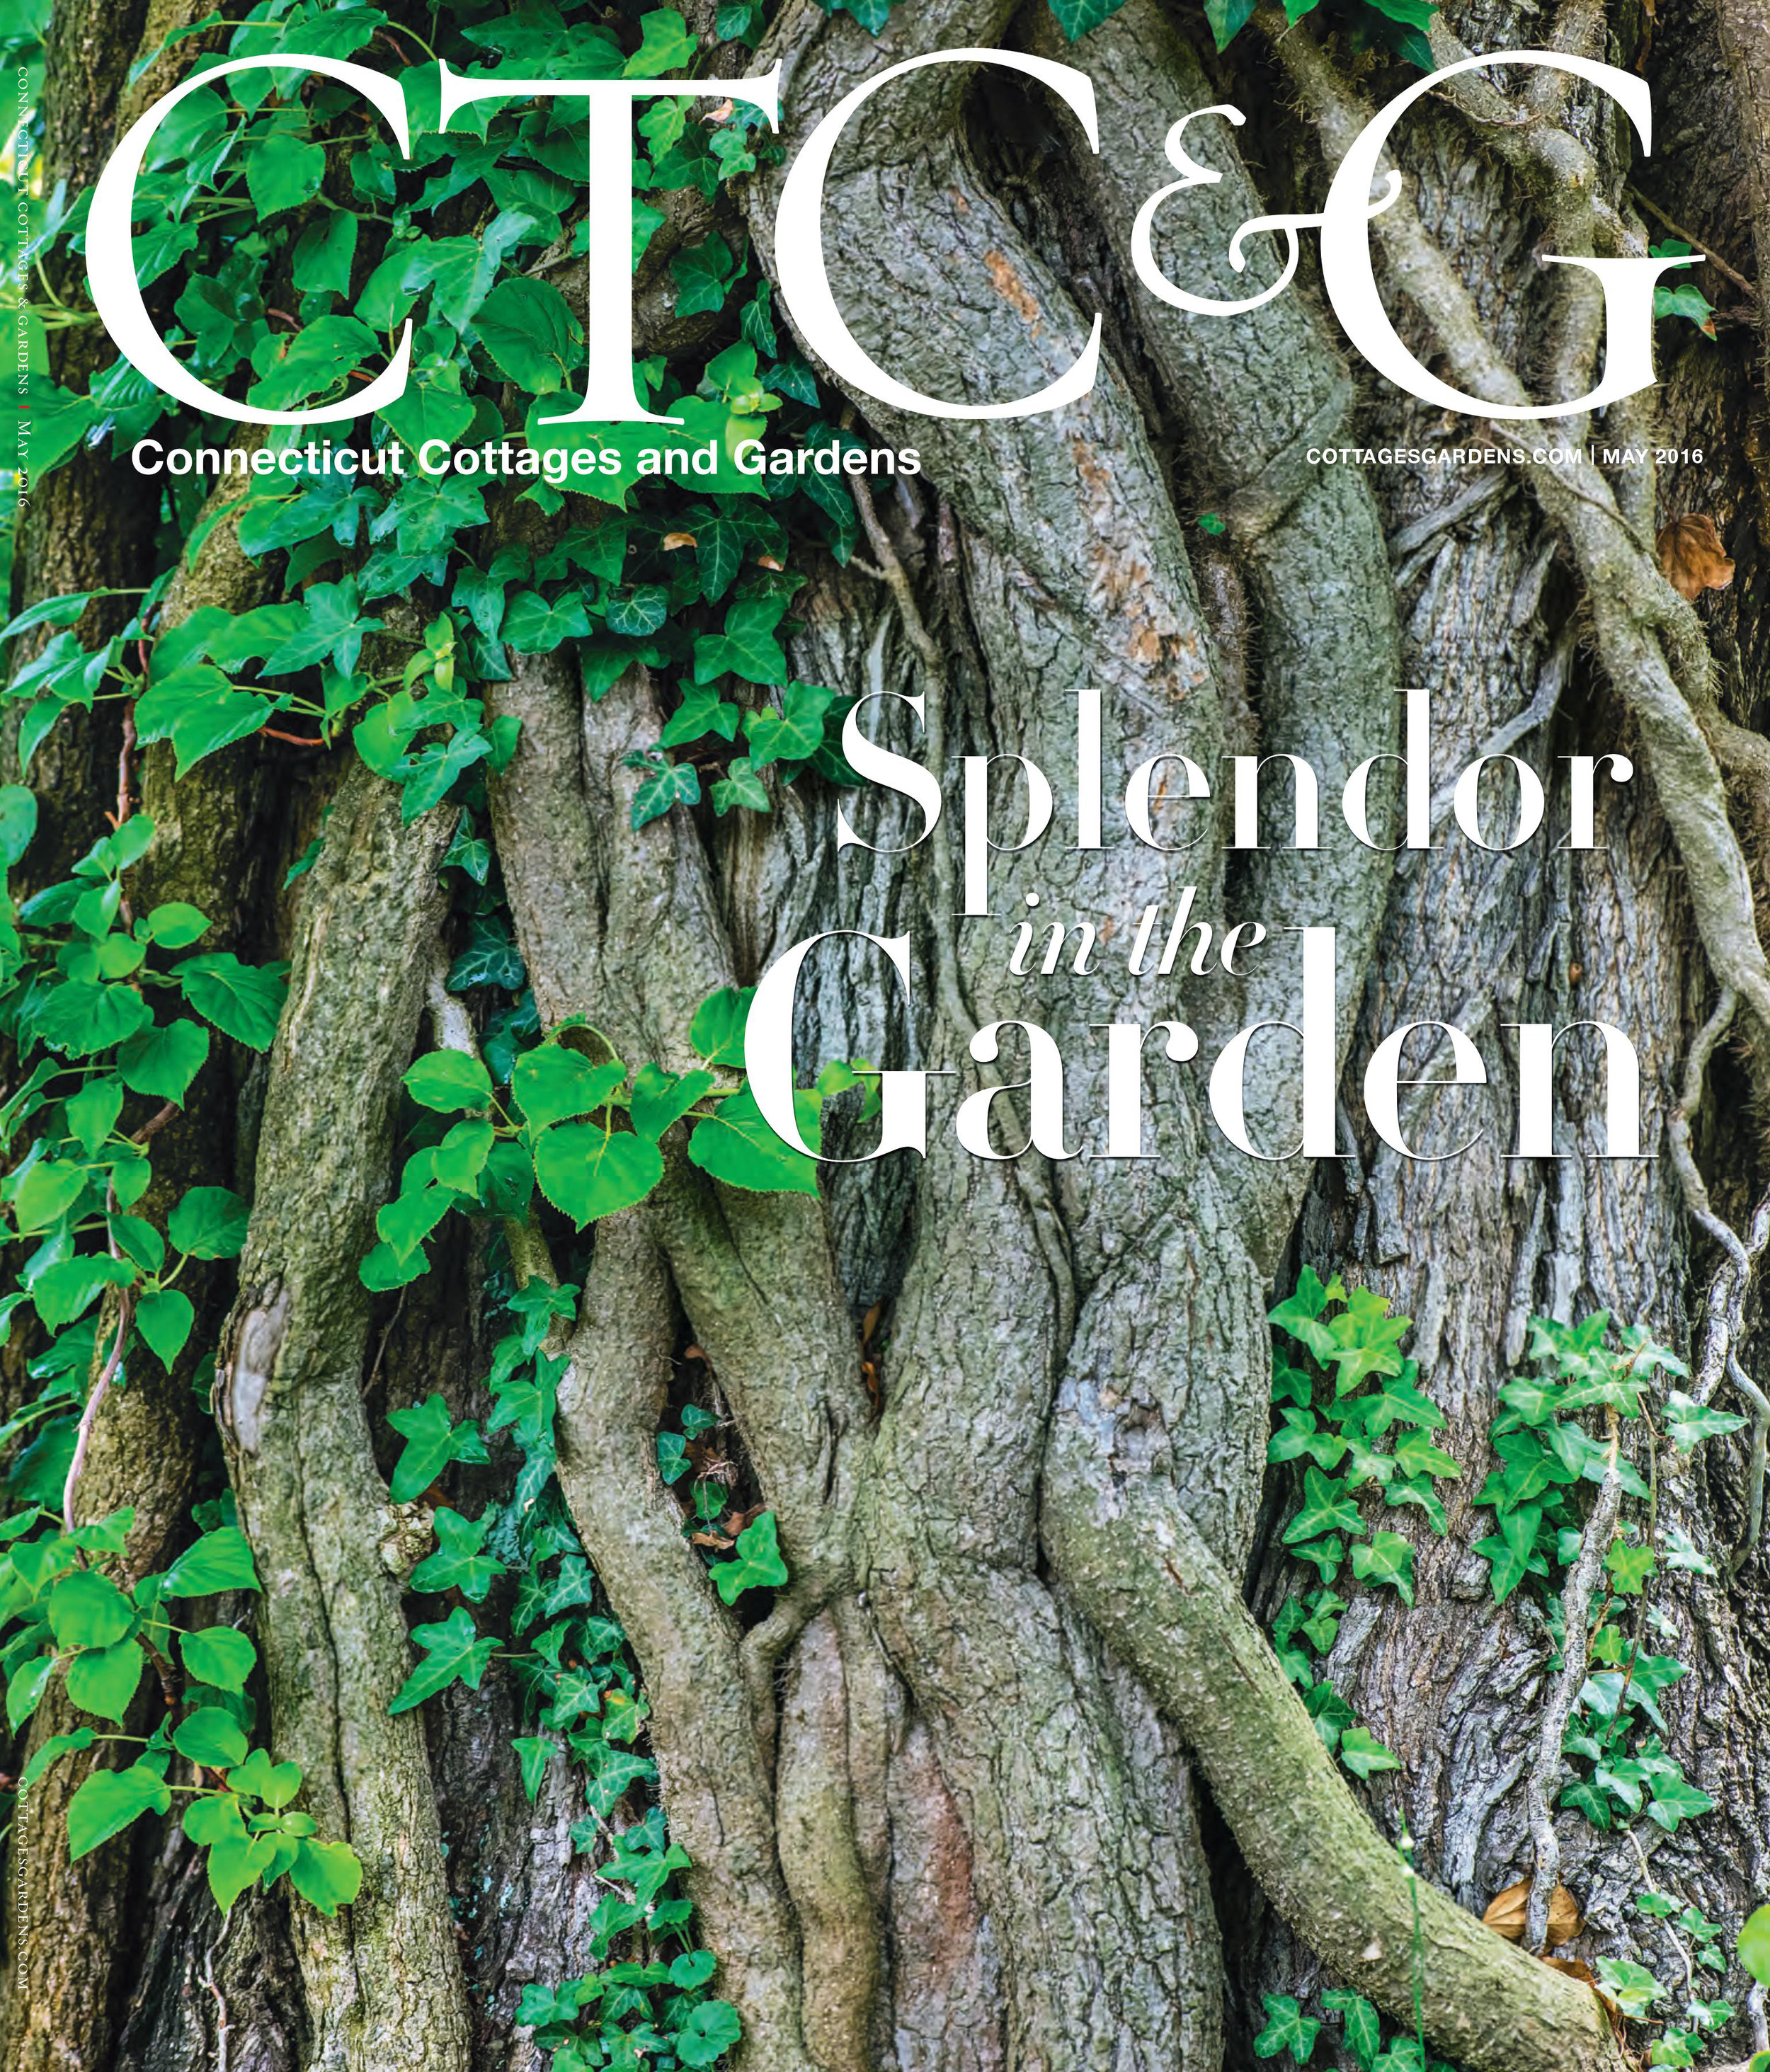 CTCG_May-2016_Cover-cropped.jpg